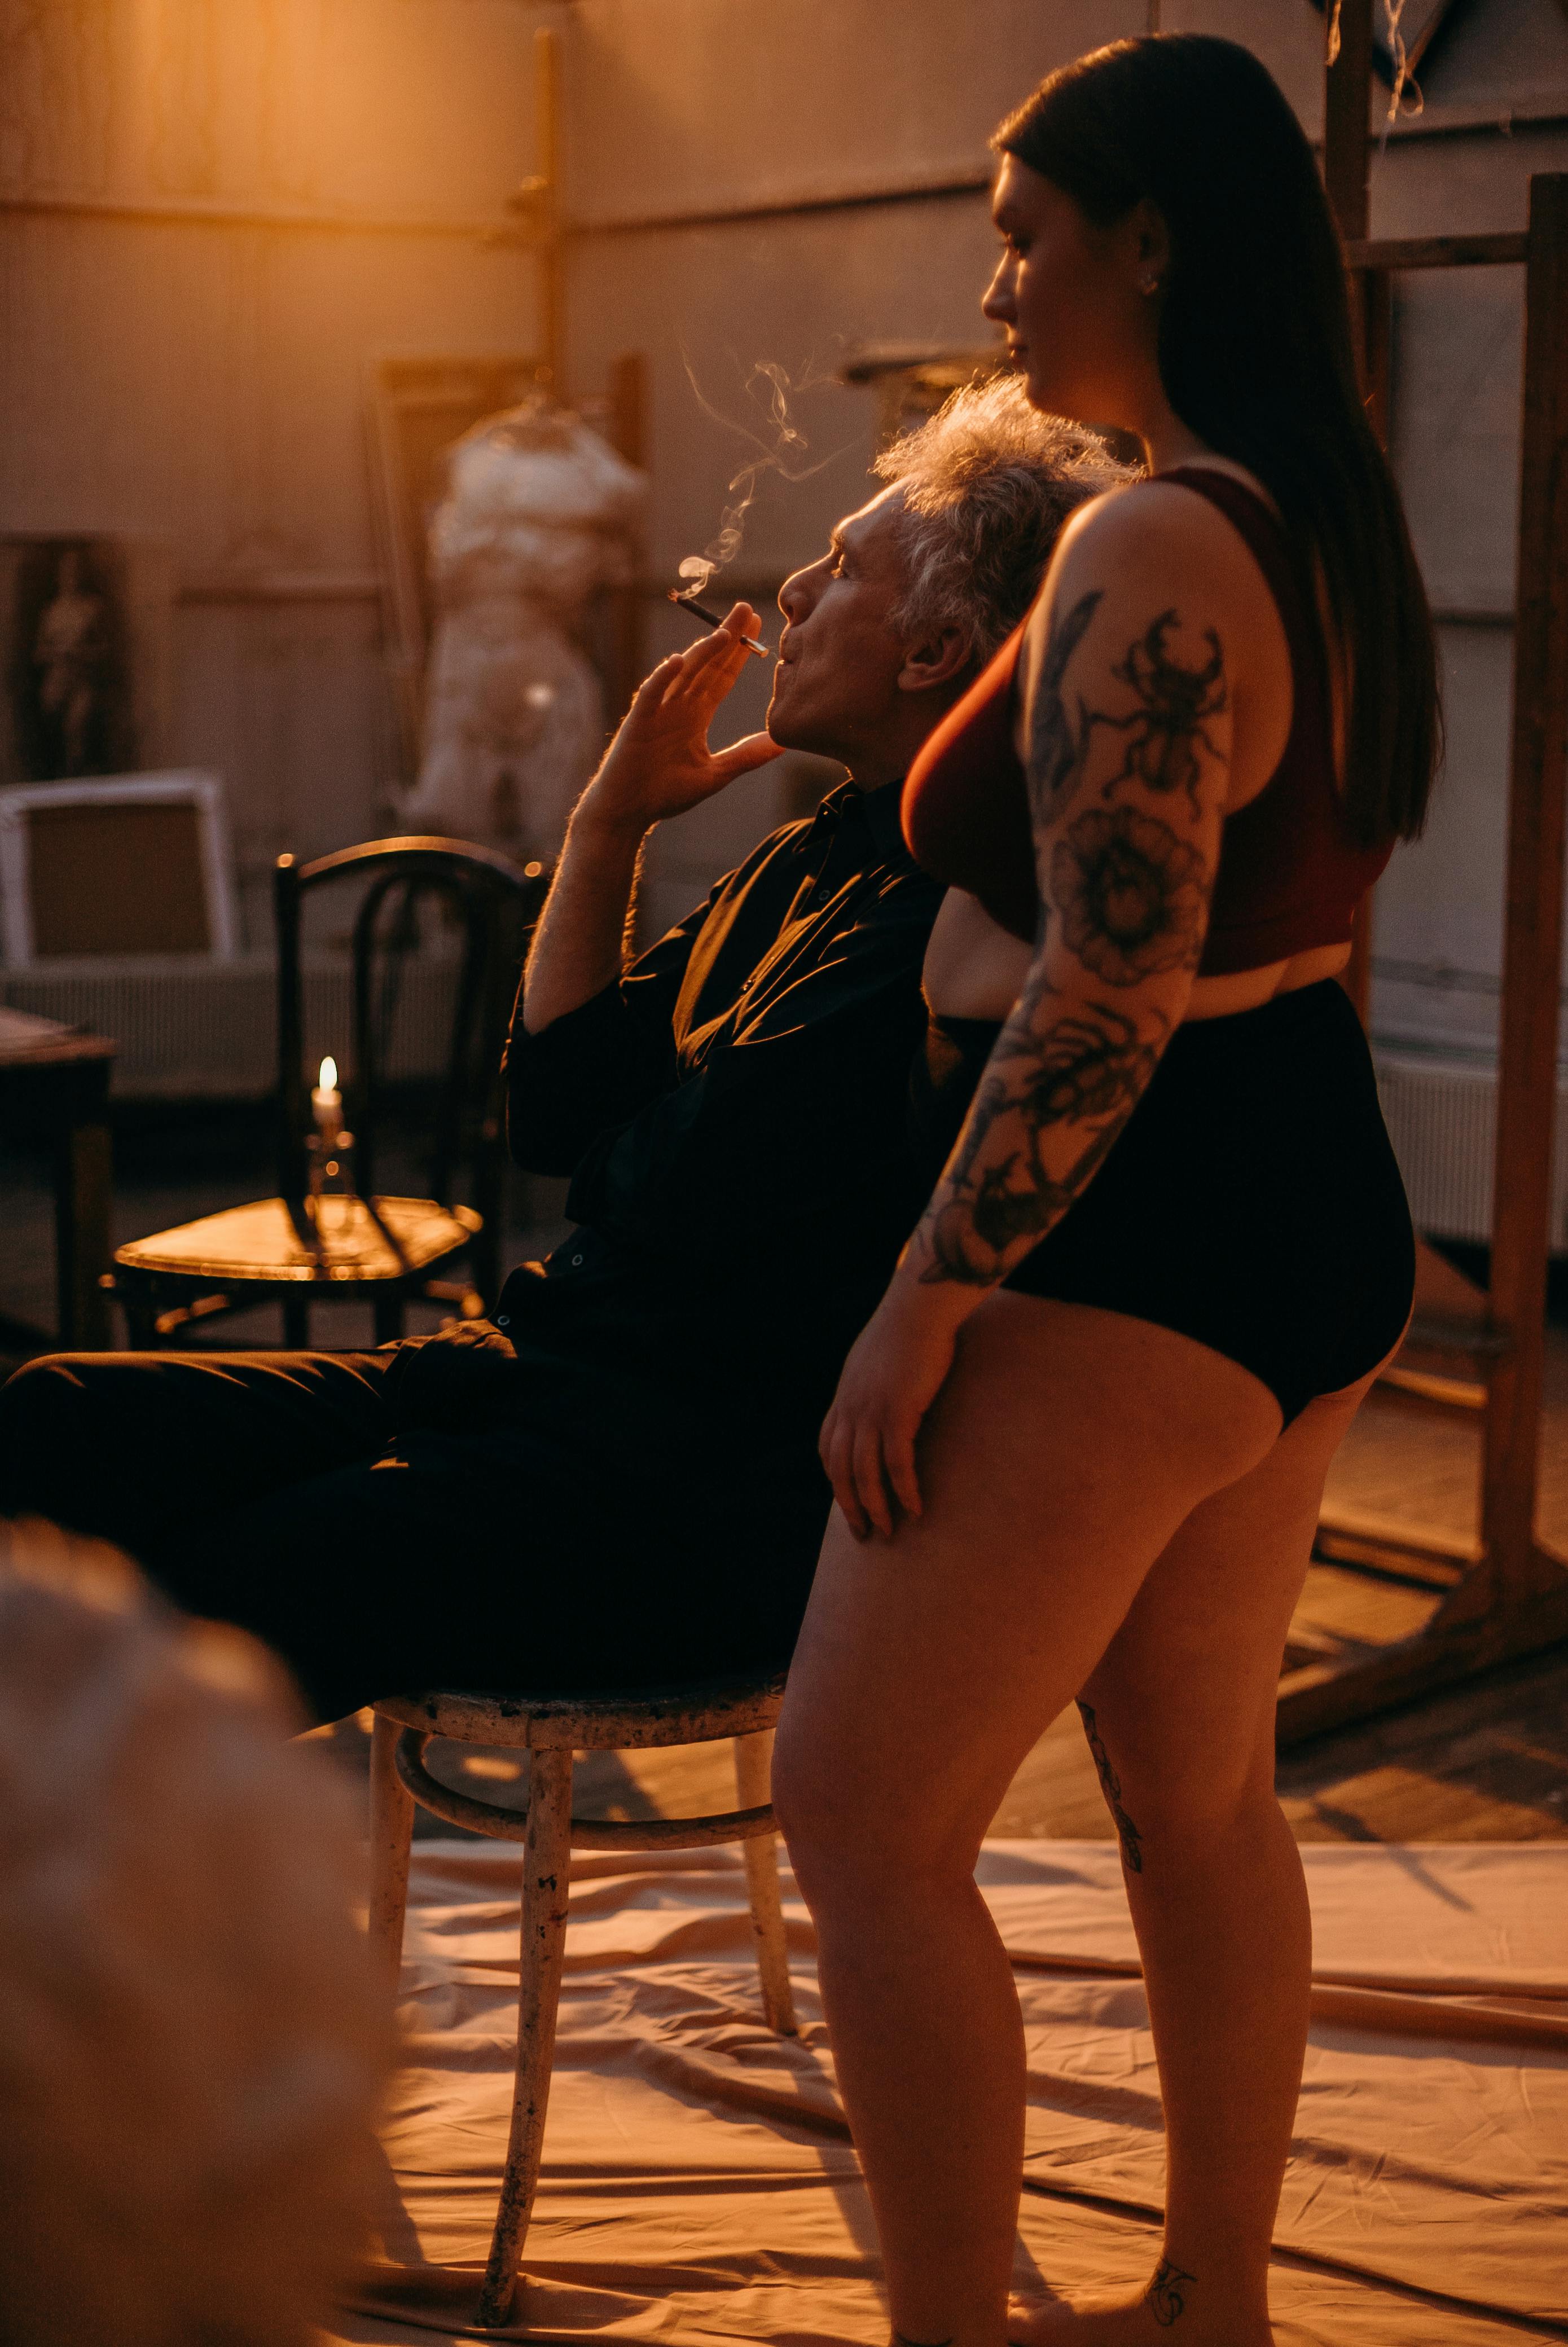 Woman in Black Underwear With Black Floral Tattoo on Her Arm